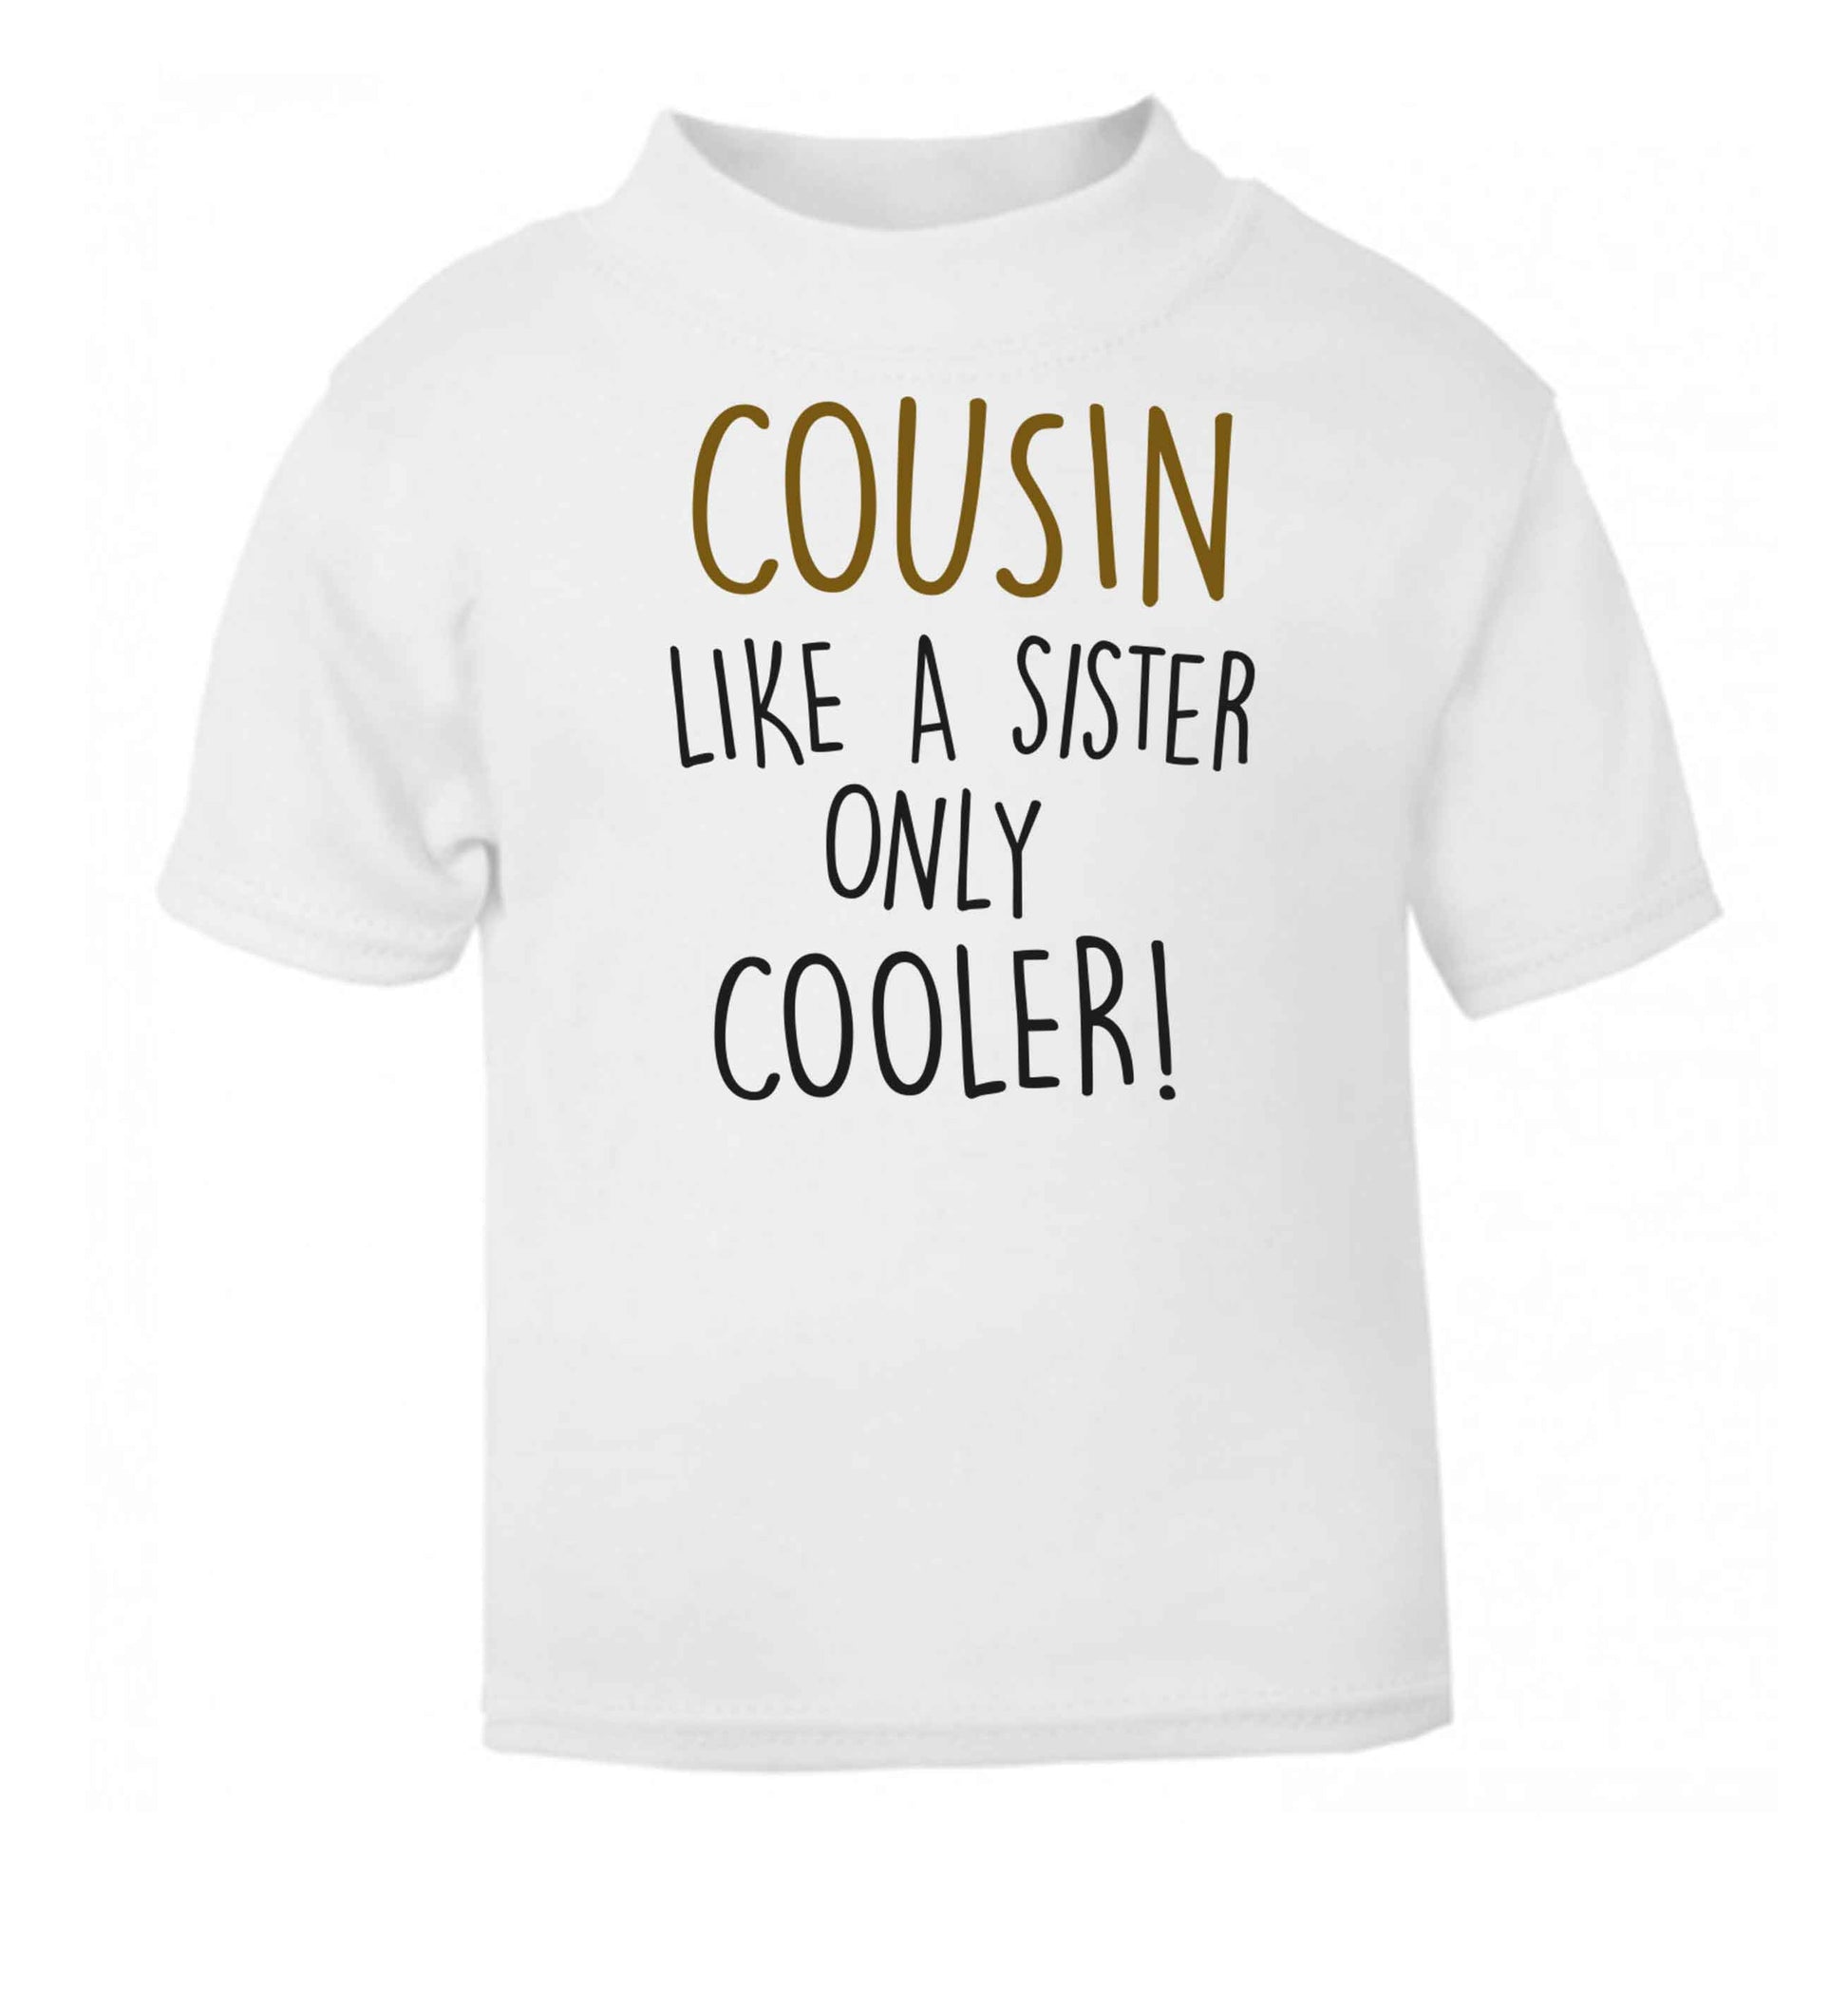 Cousin like a sister only cooler white baby toddler Tshirt 2 Years